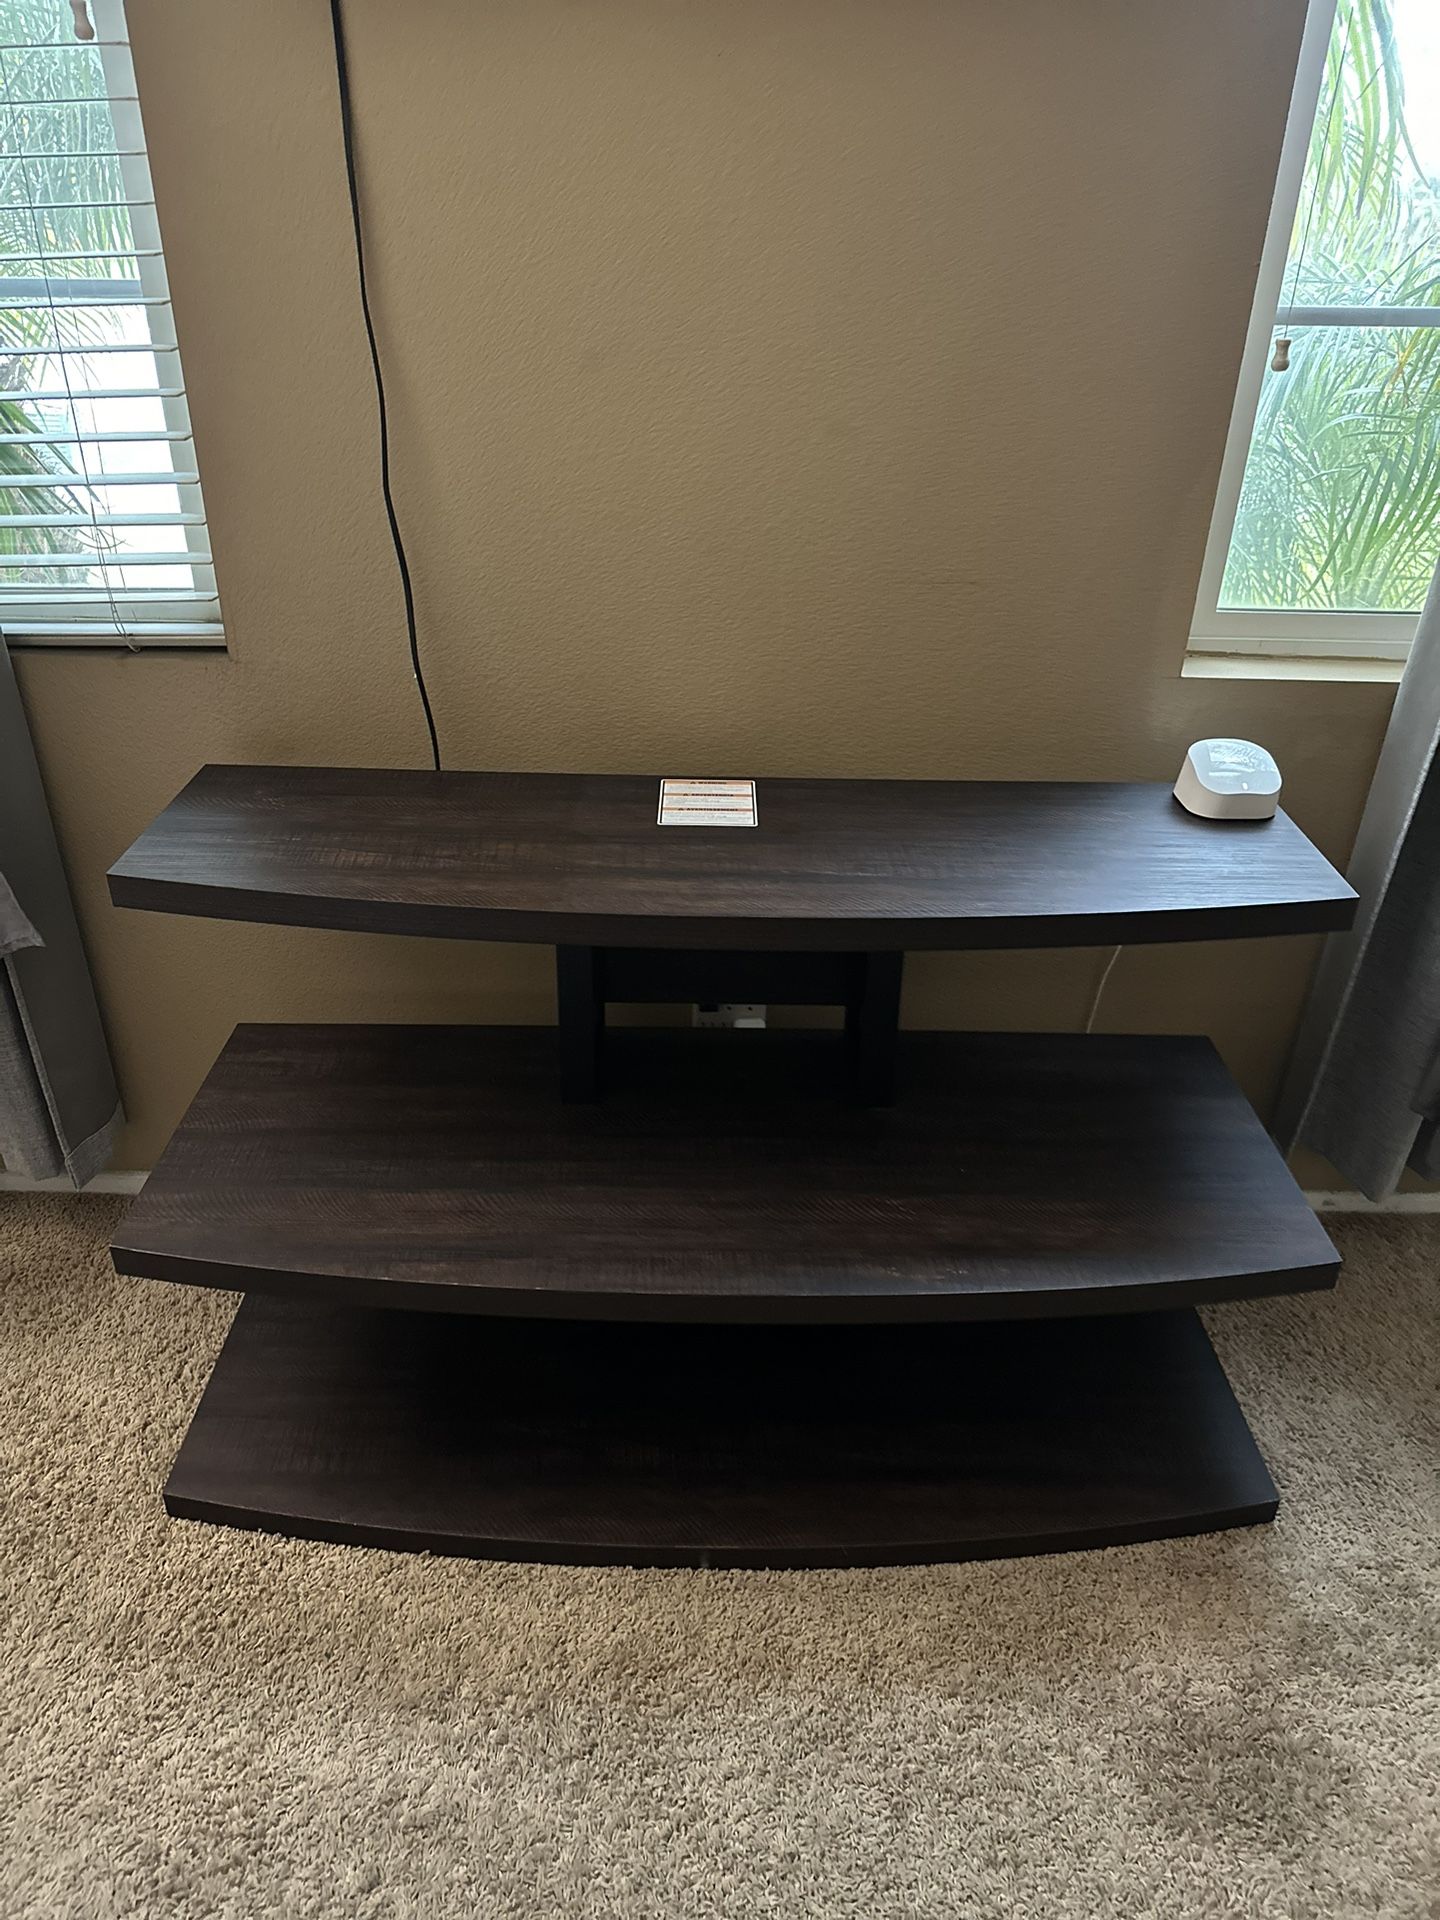 TV Entertainment Table/stand 